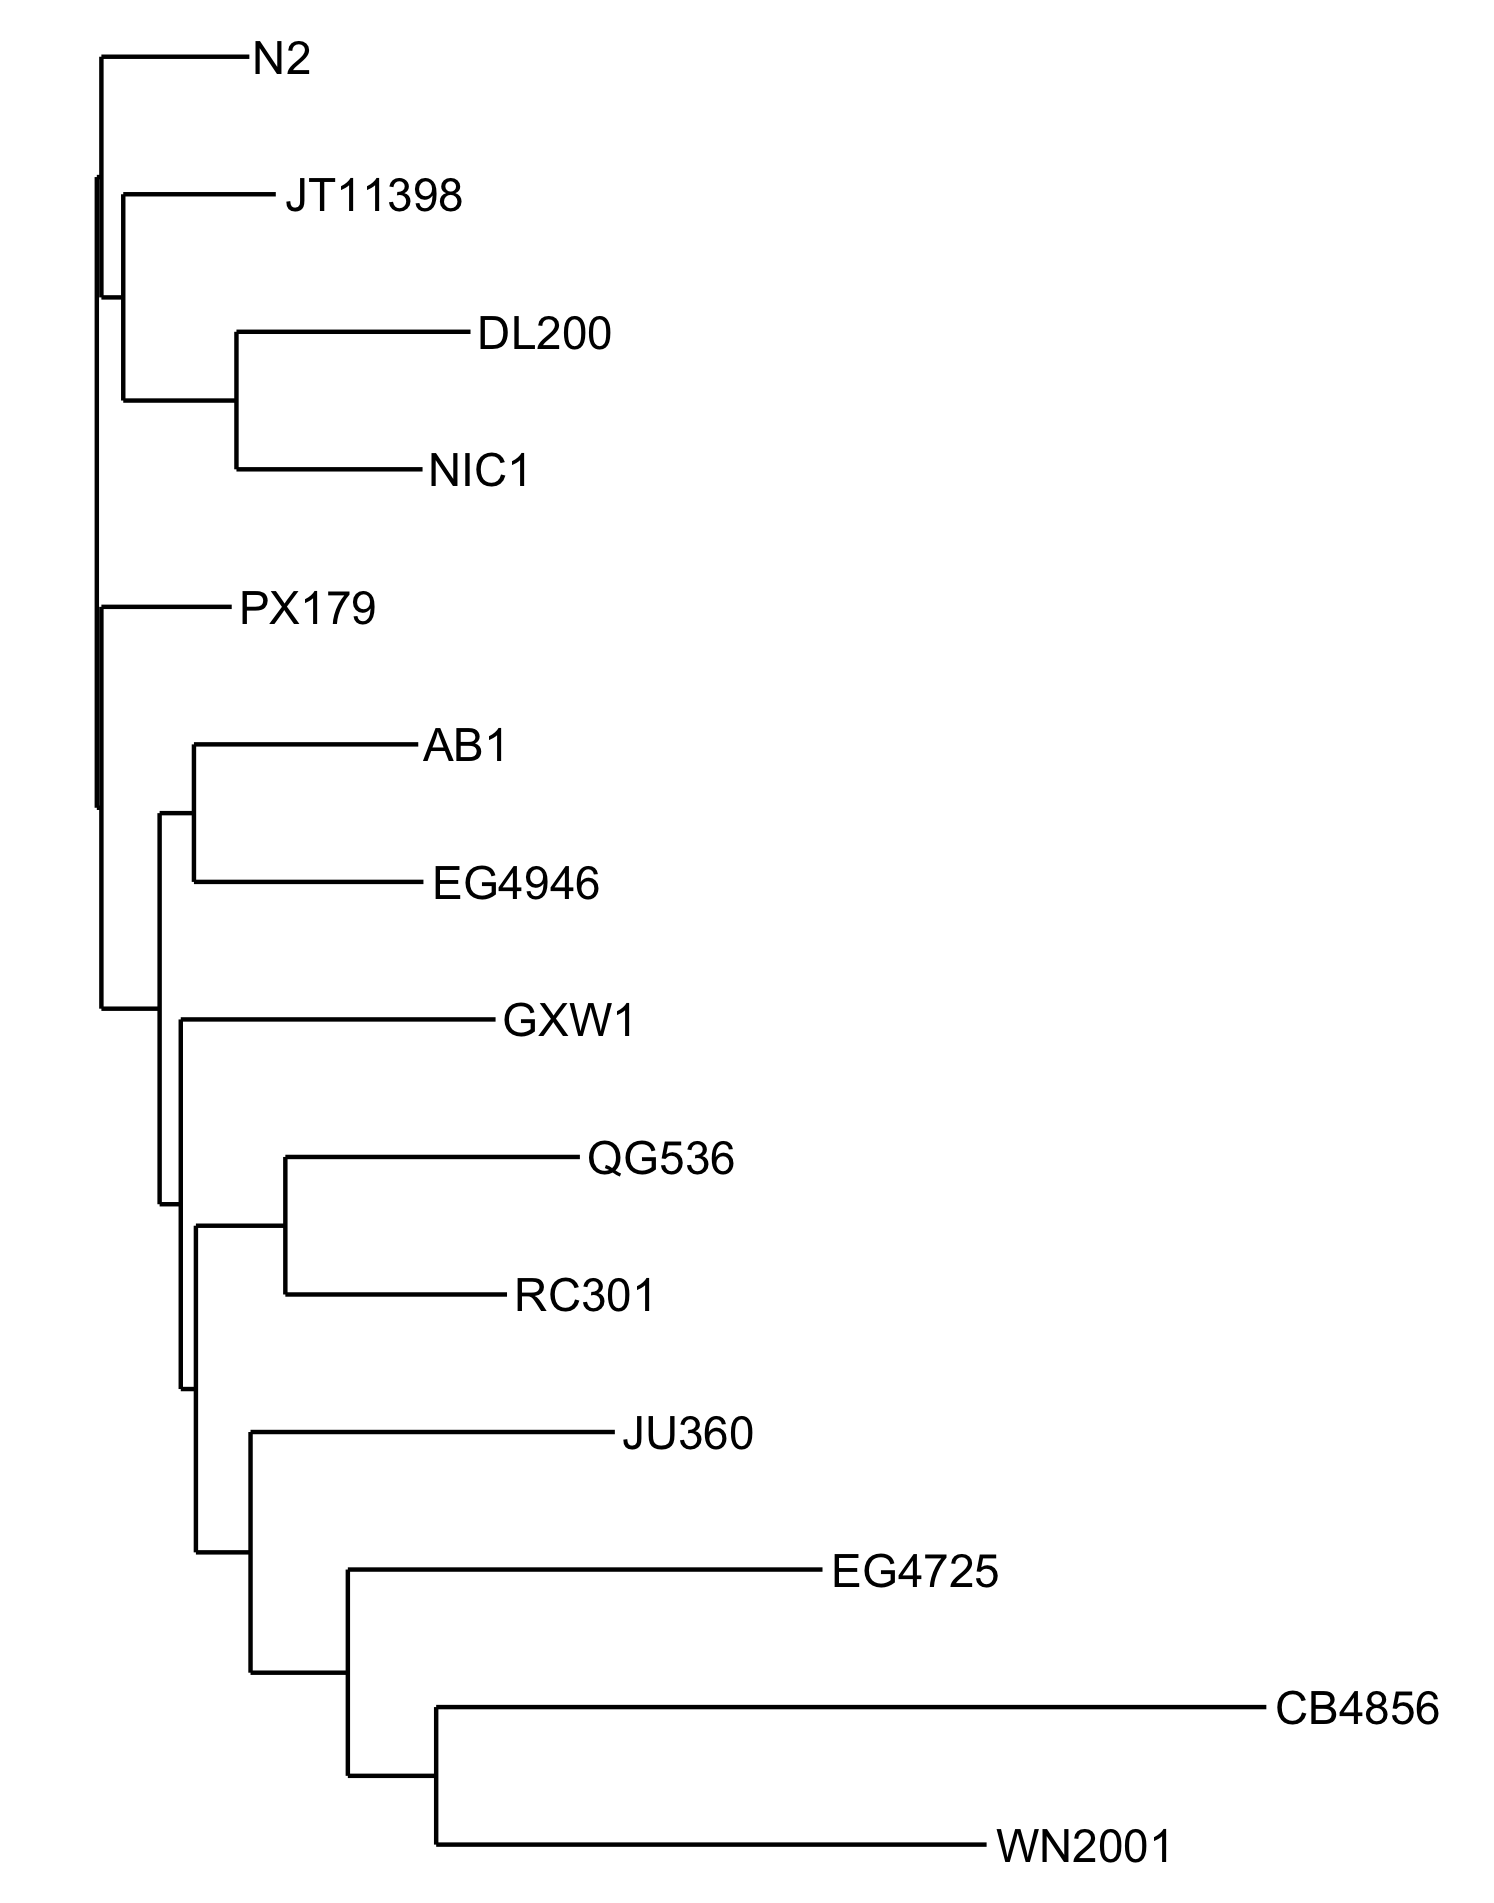 phylogeny example in R